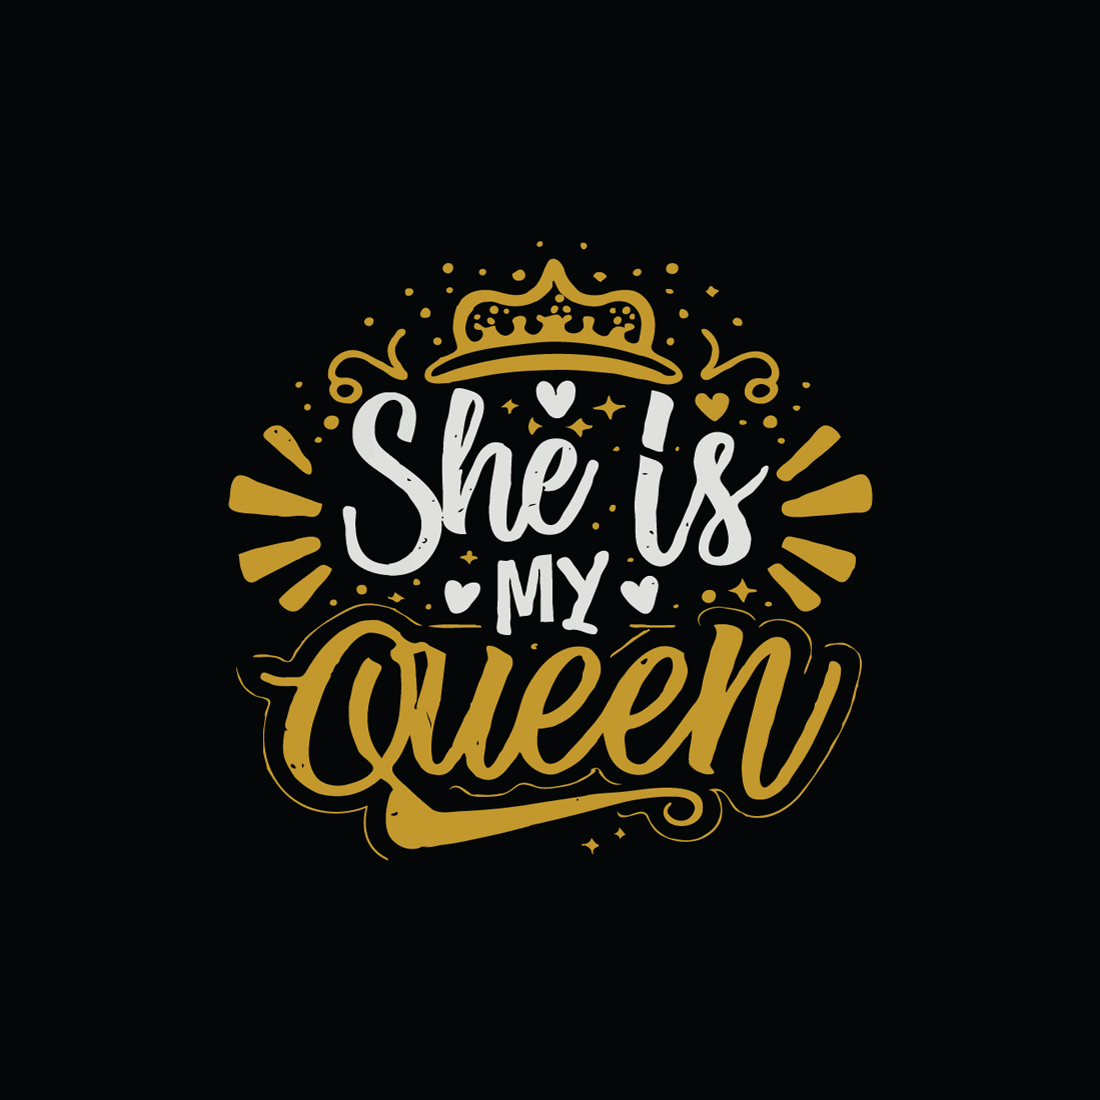 She is my Queen vector illustration Fun text for t-shirt print and social media cover image.